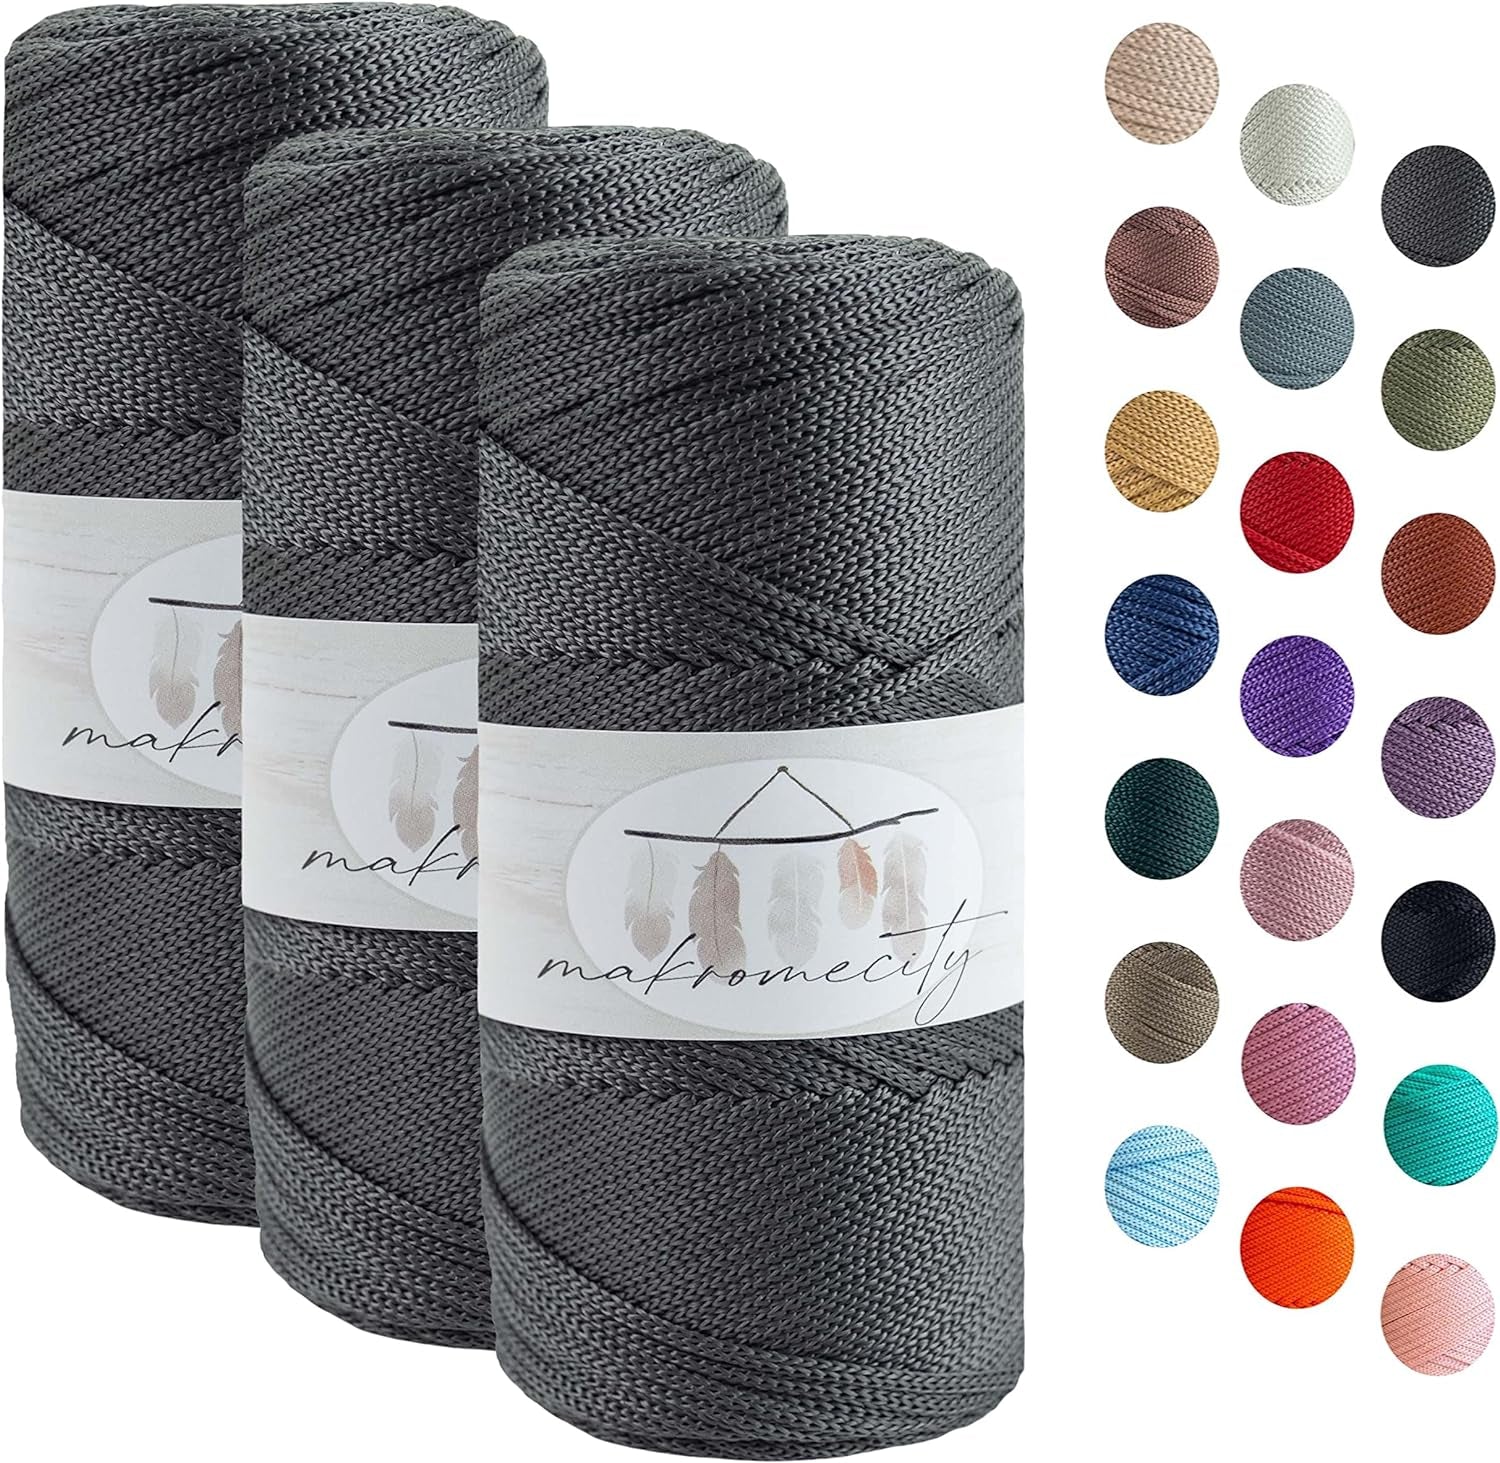 , Polyester Macrame Cord 2Mm X 125 Yards (375 Feet) 2Mm Polypropylene Anthracite Macrame Cord Crochet Macrame Bag Cord Crafts for Wall Hangings, Bags, Underplate, Rug